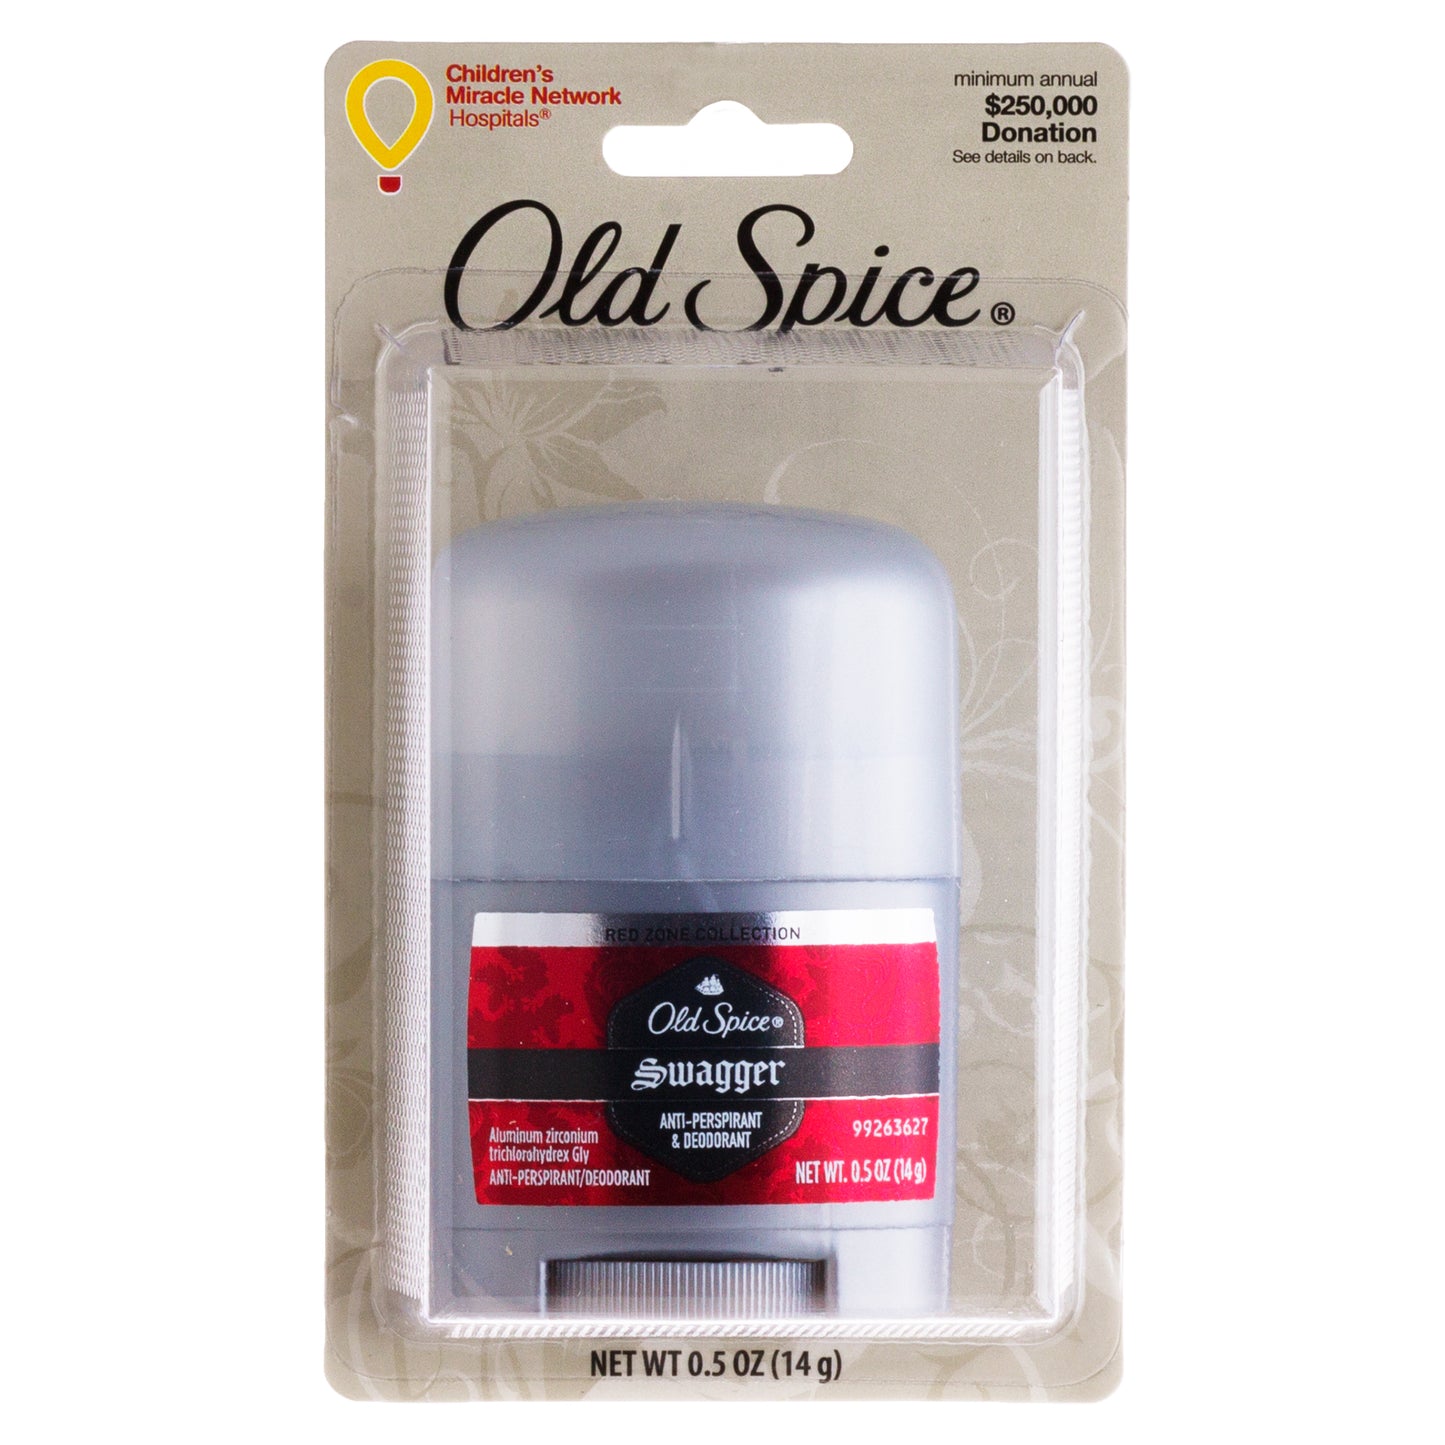 OLD SPICE DEODORANT (CARDED)